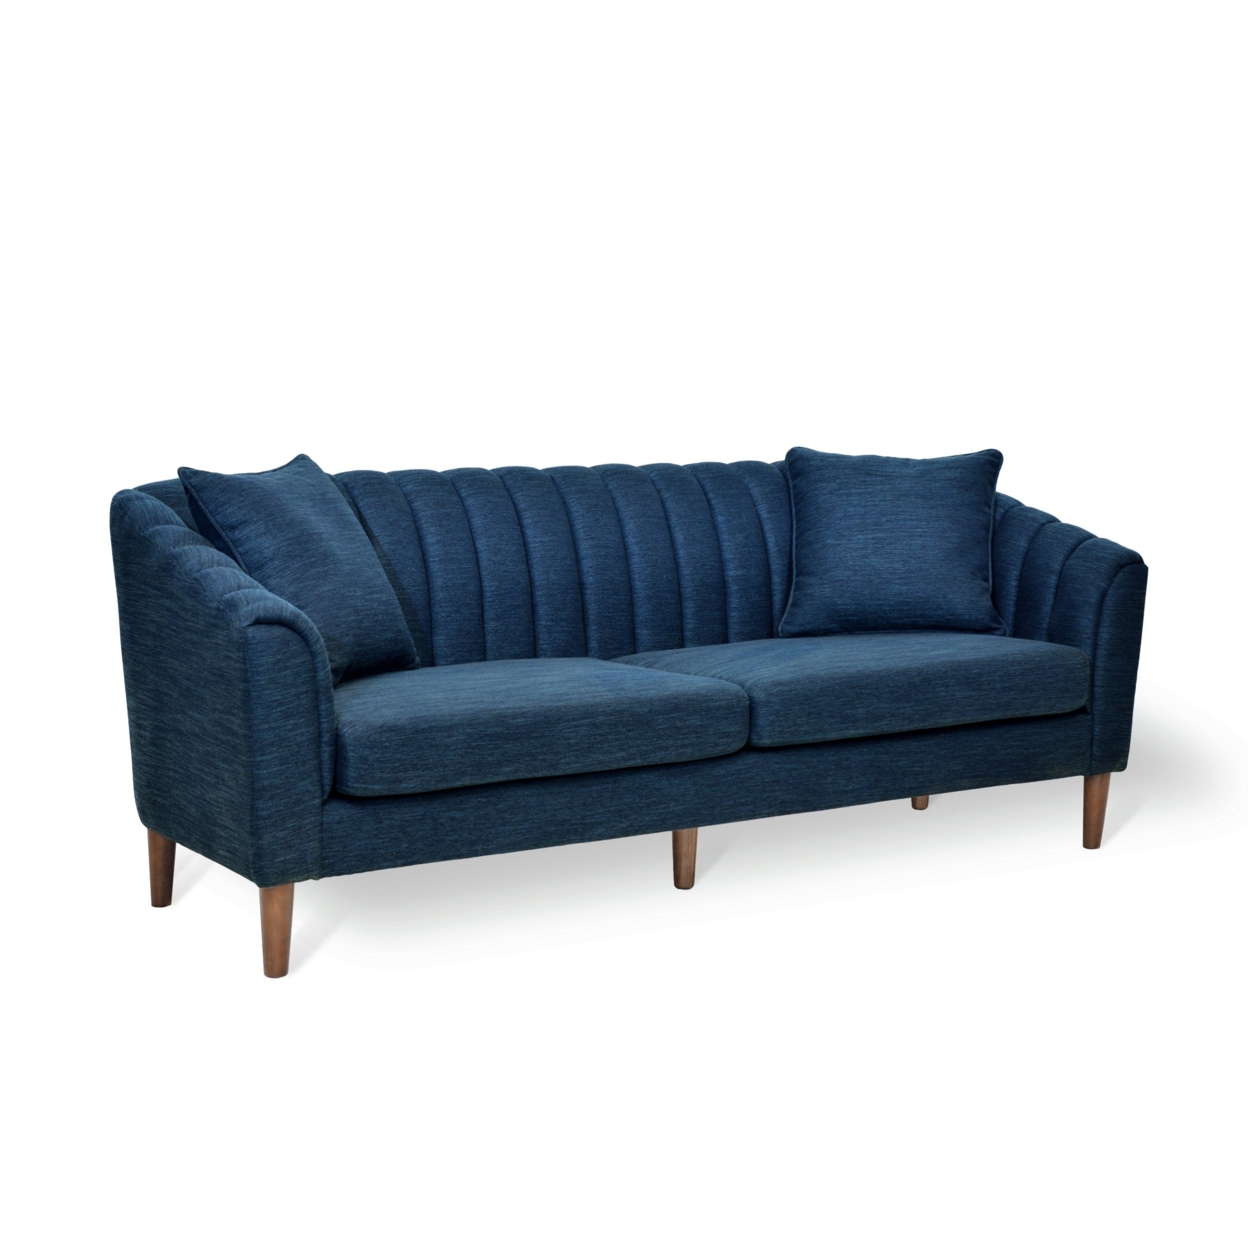 Jeannie Contemporary Fabric 3 Seater Sofa - Navy Blue